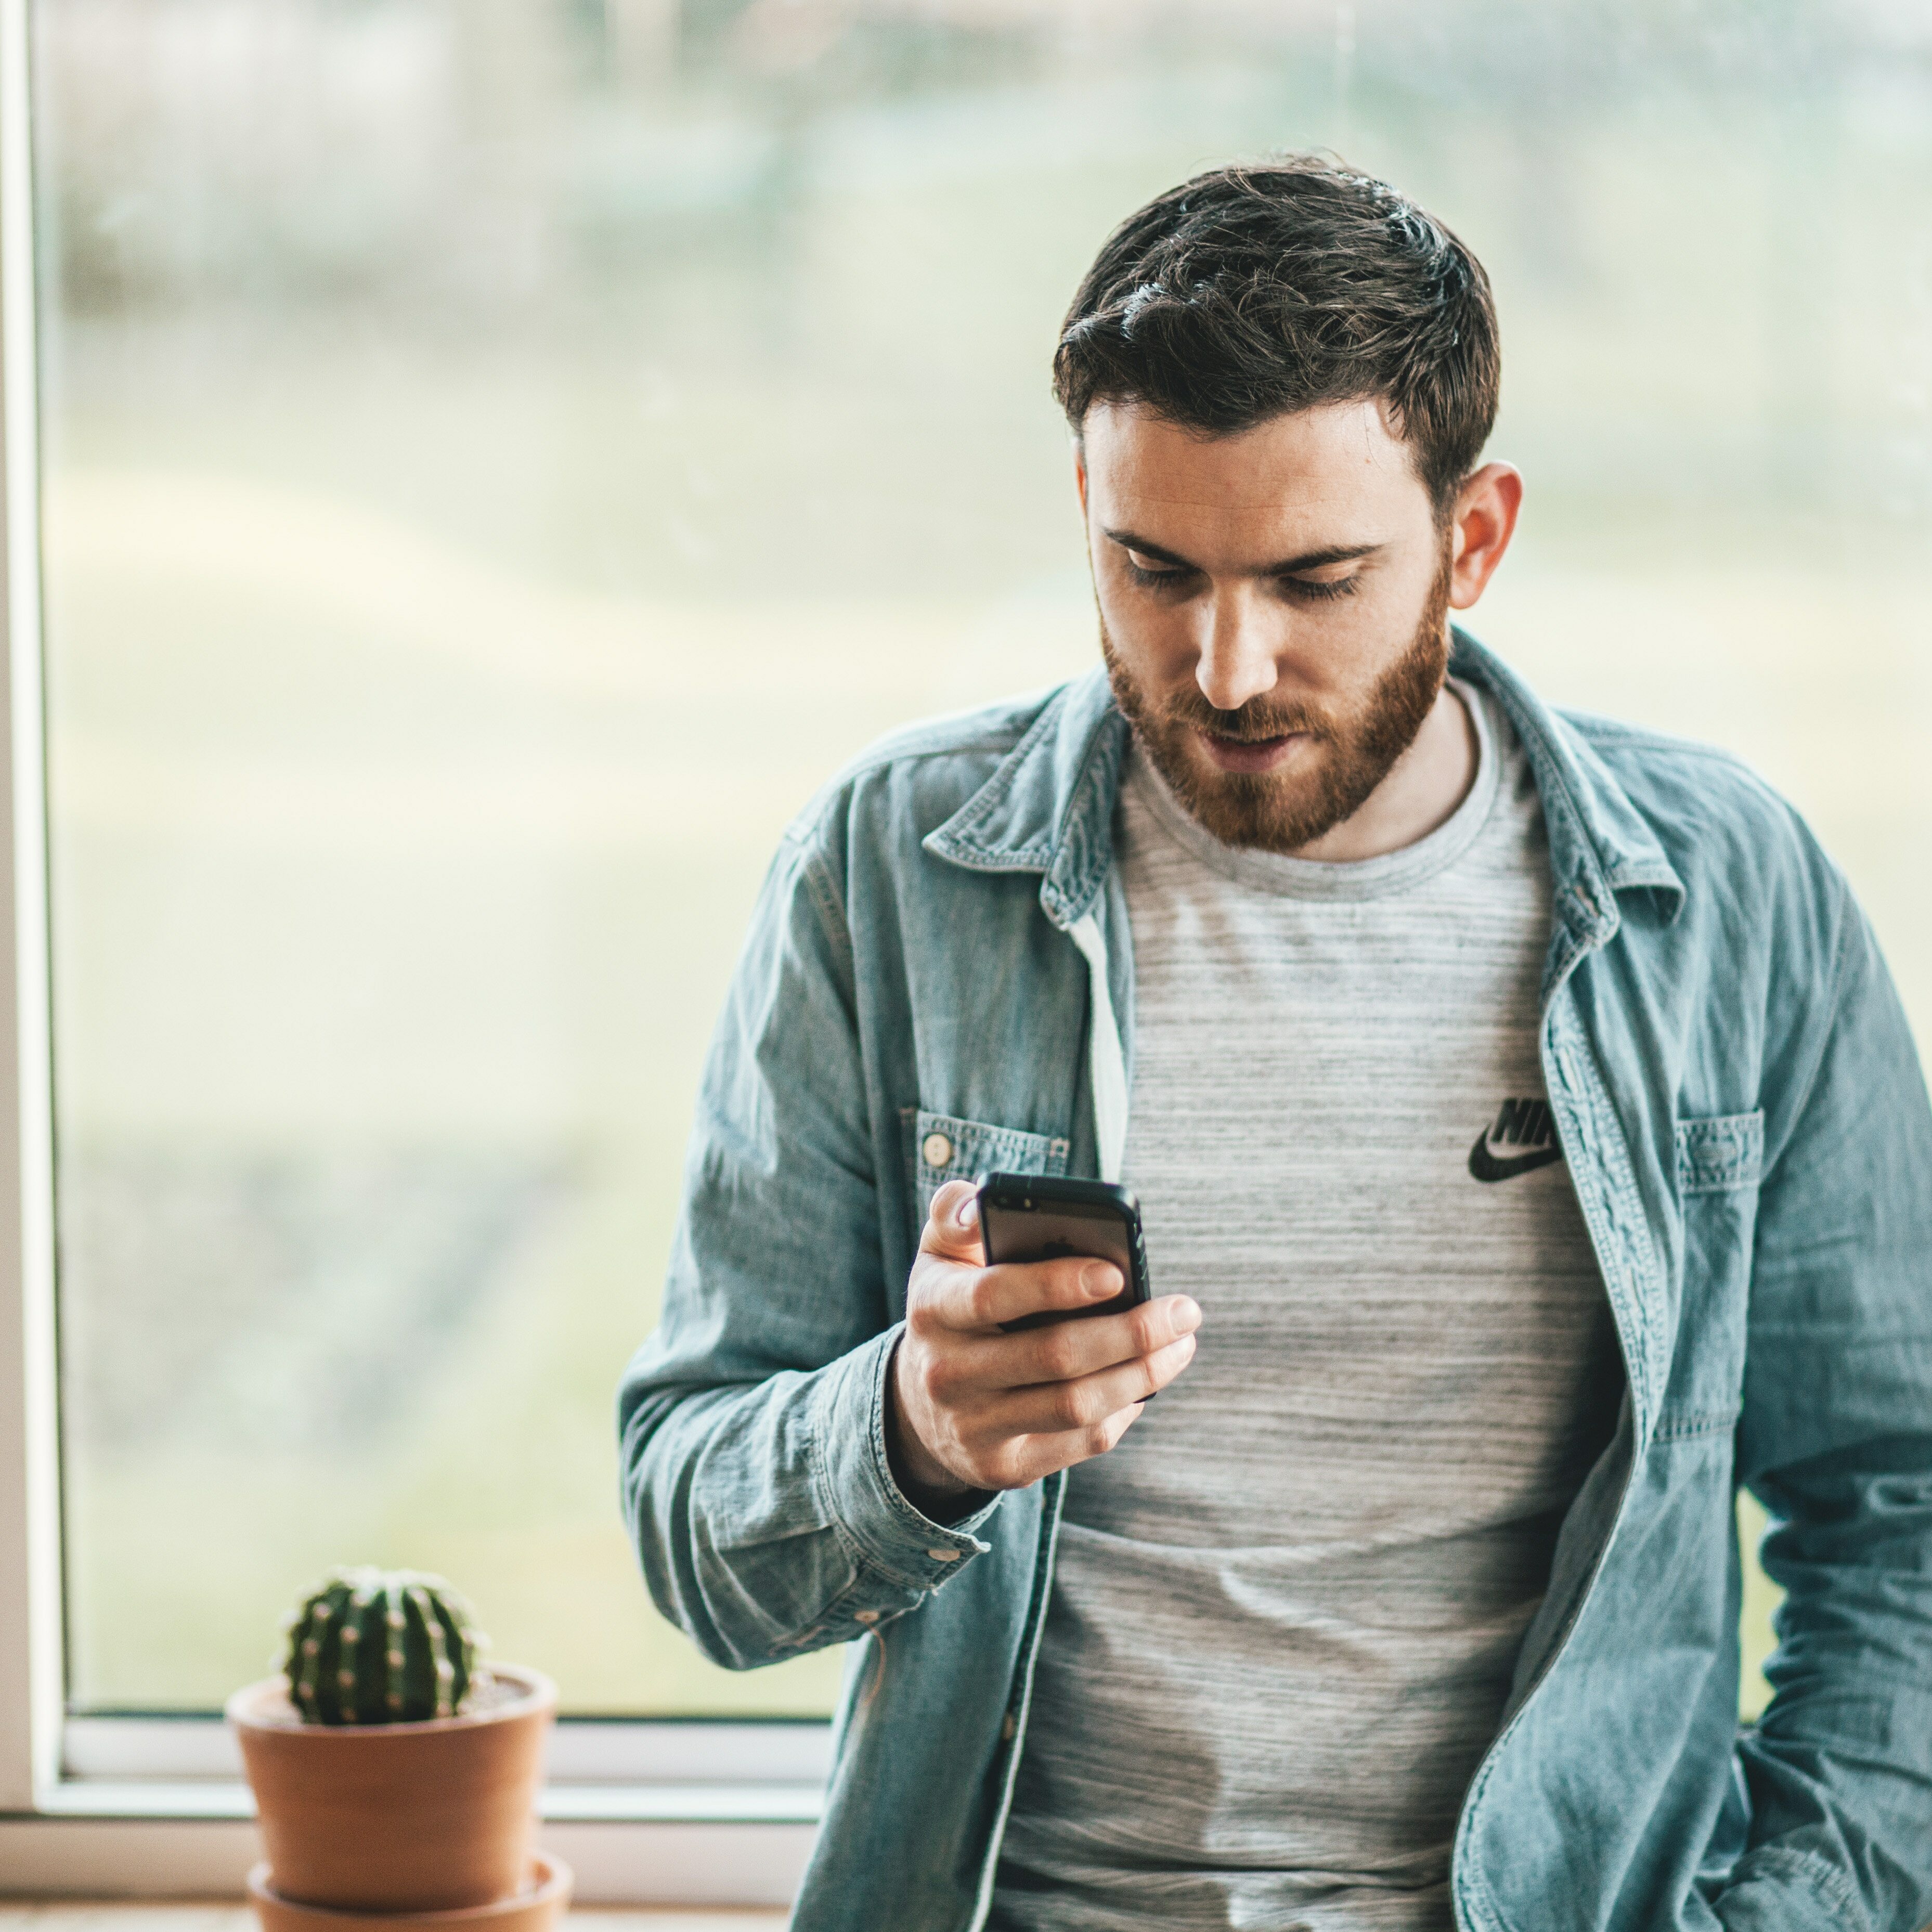 Man stressed looking at phone